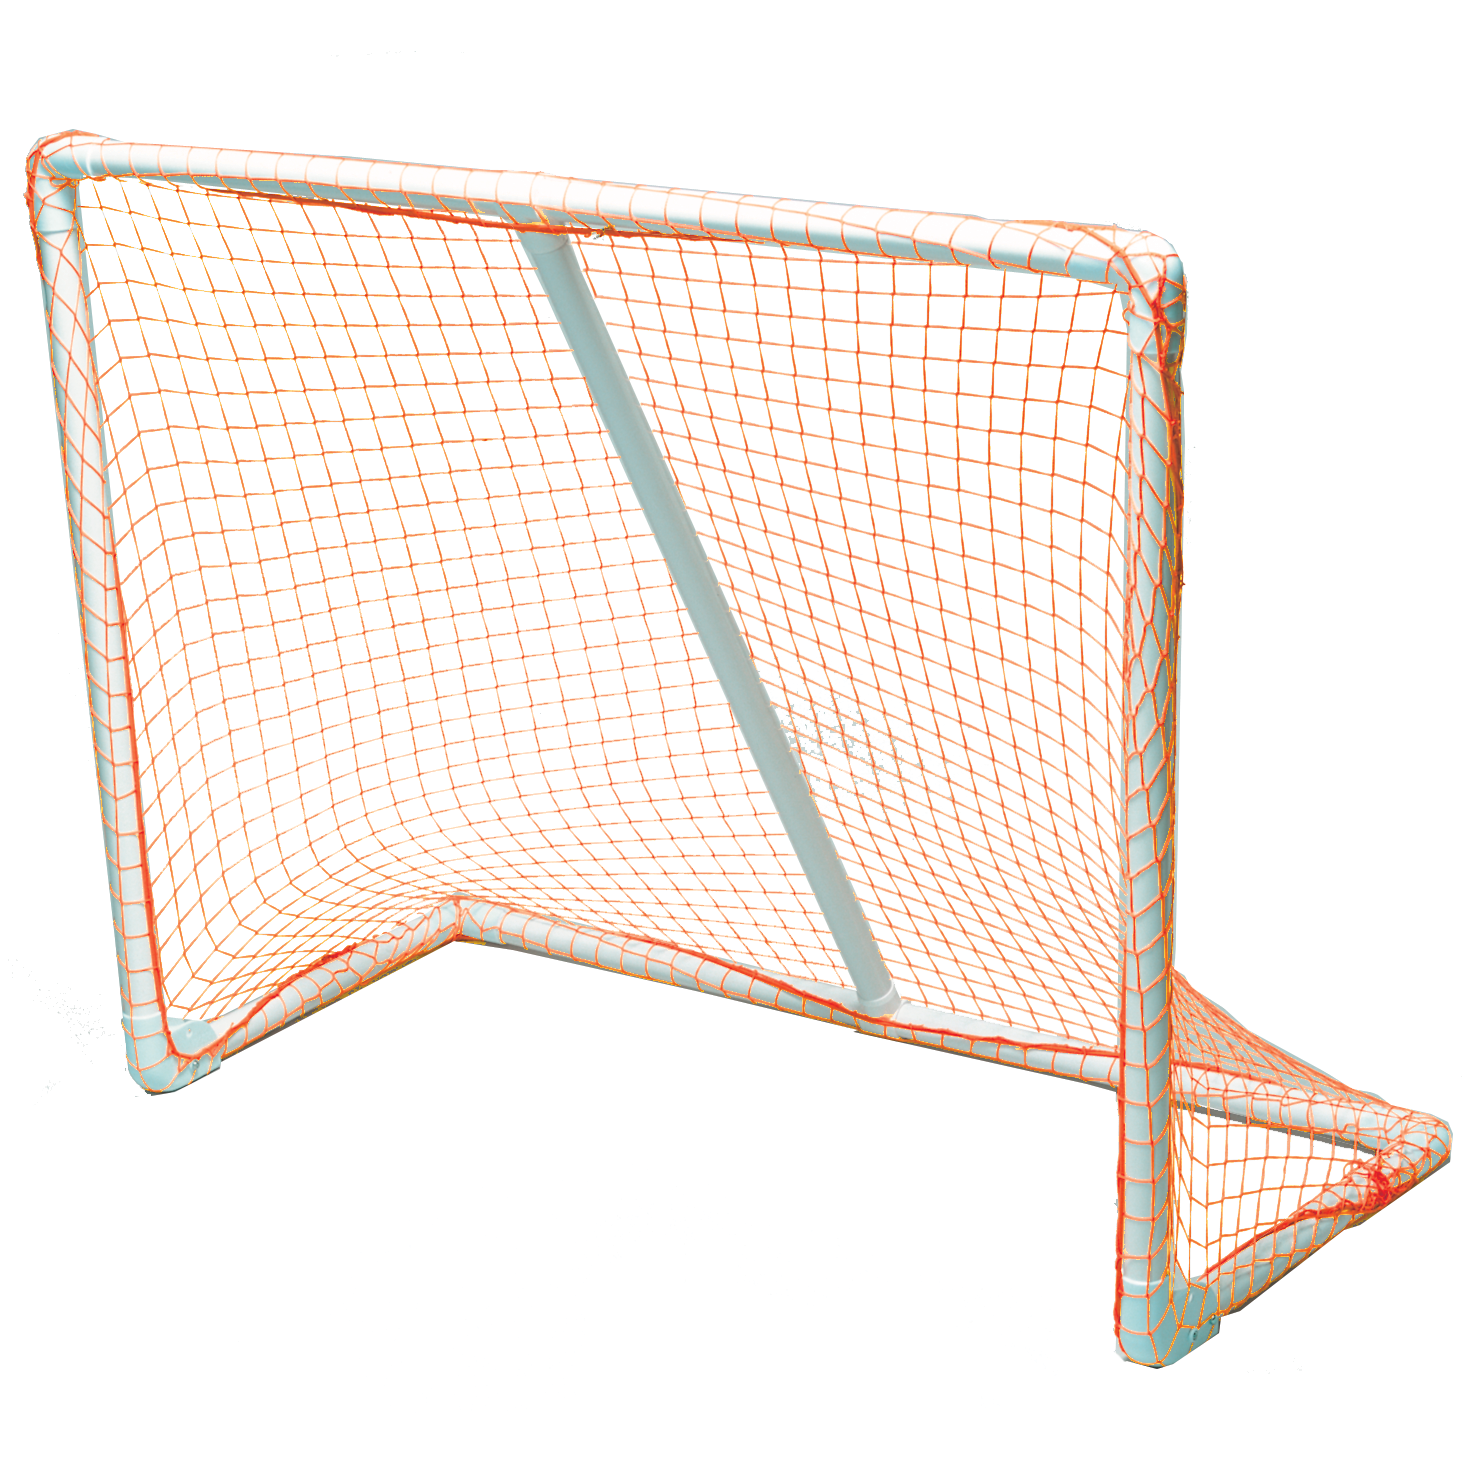 Park and Sports SGP 6 Foot Soccer Goal